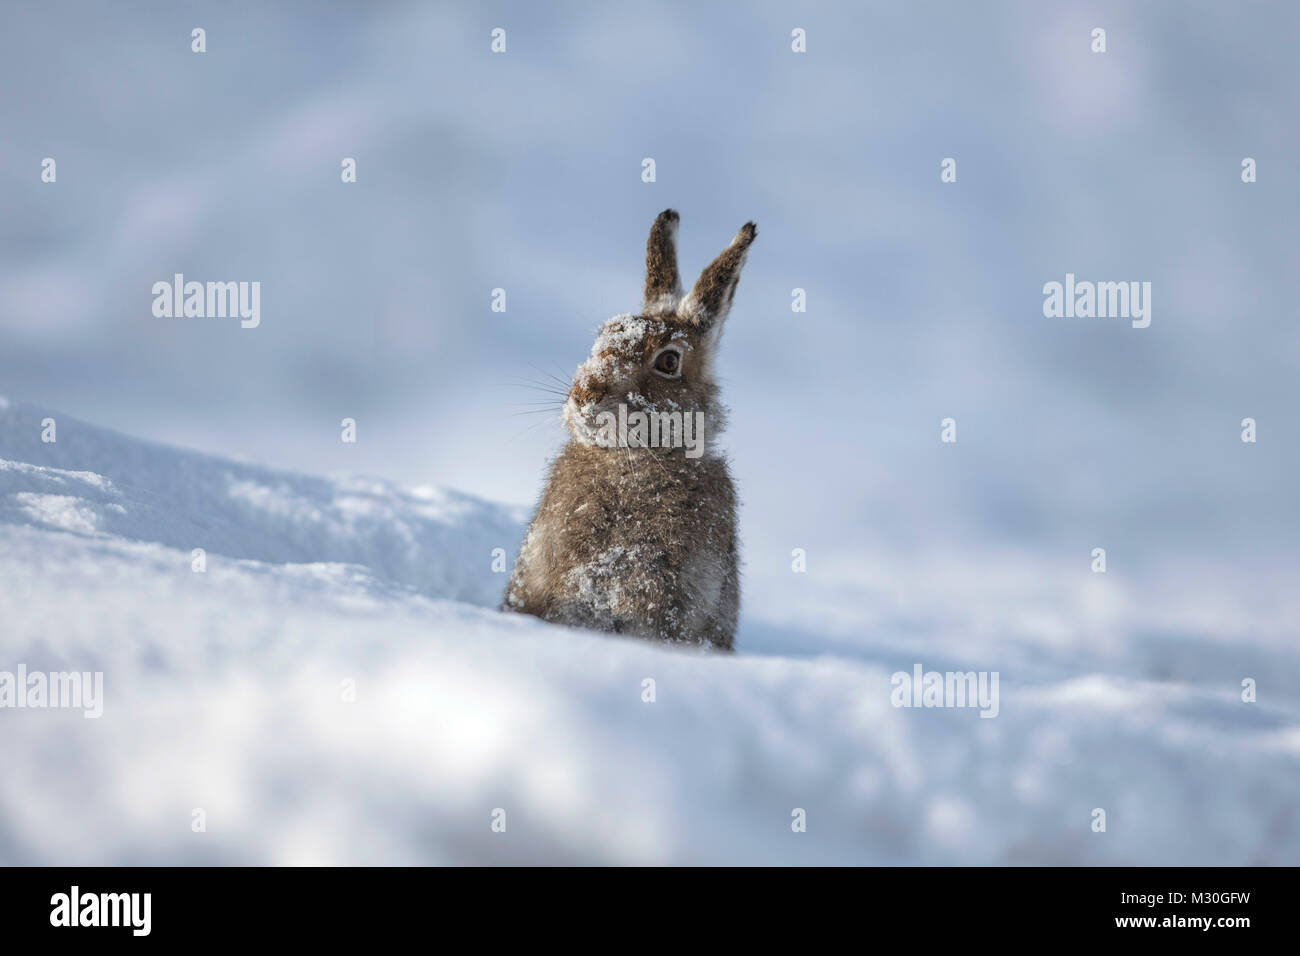 White hare in snow, snow covered face Stock Photo